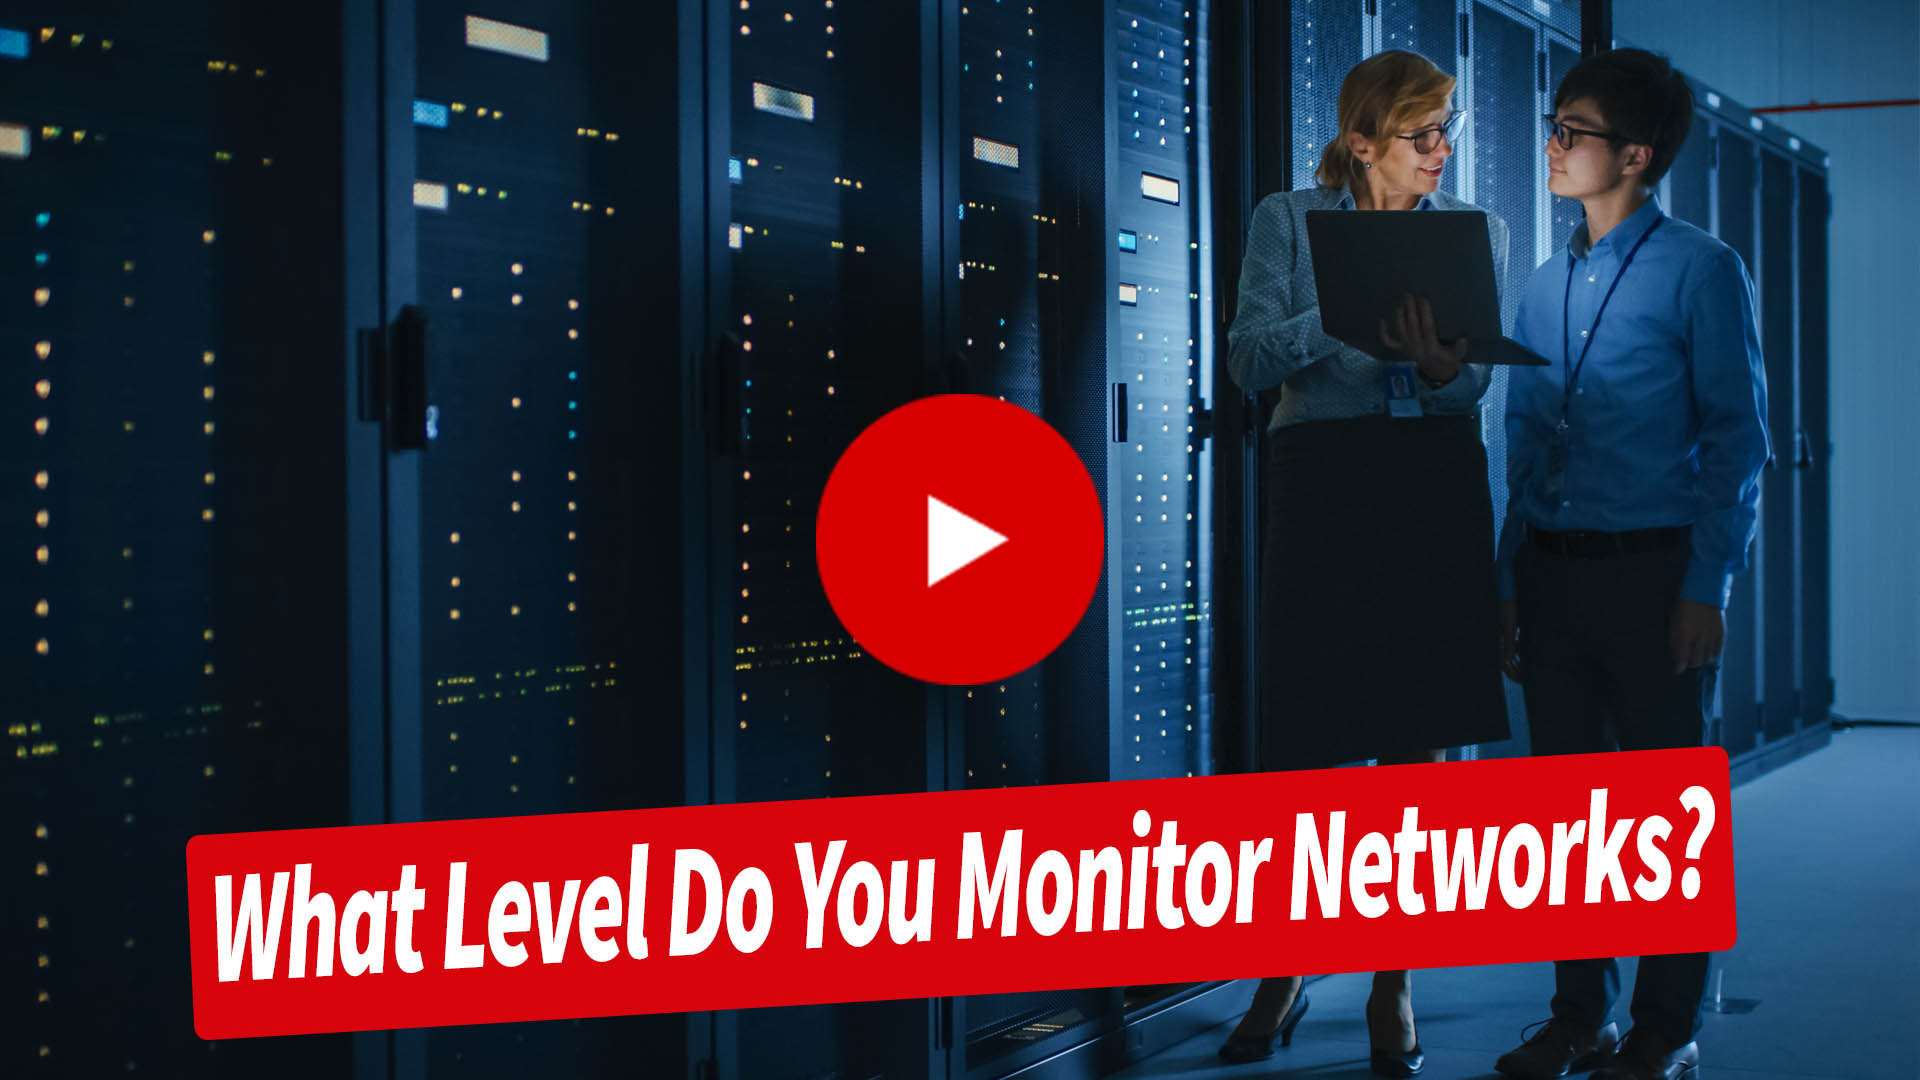 How and At What Level Do You Monitor Networks?